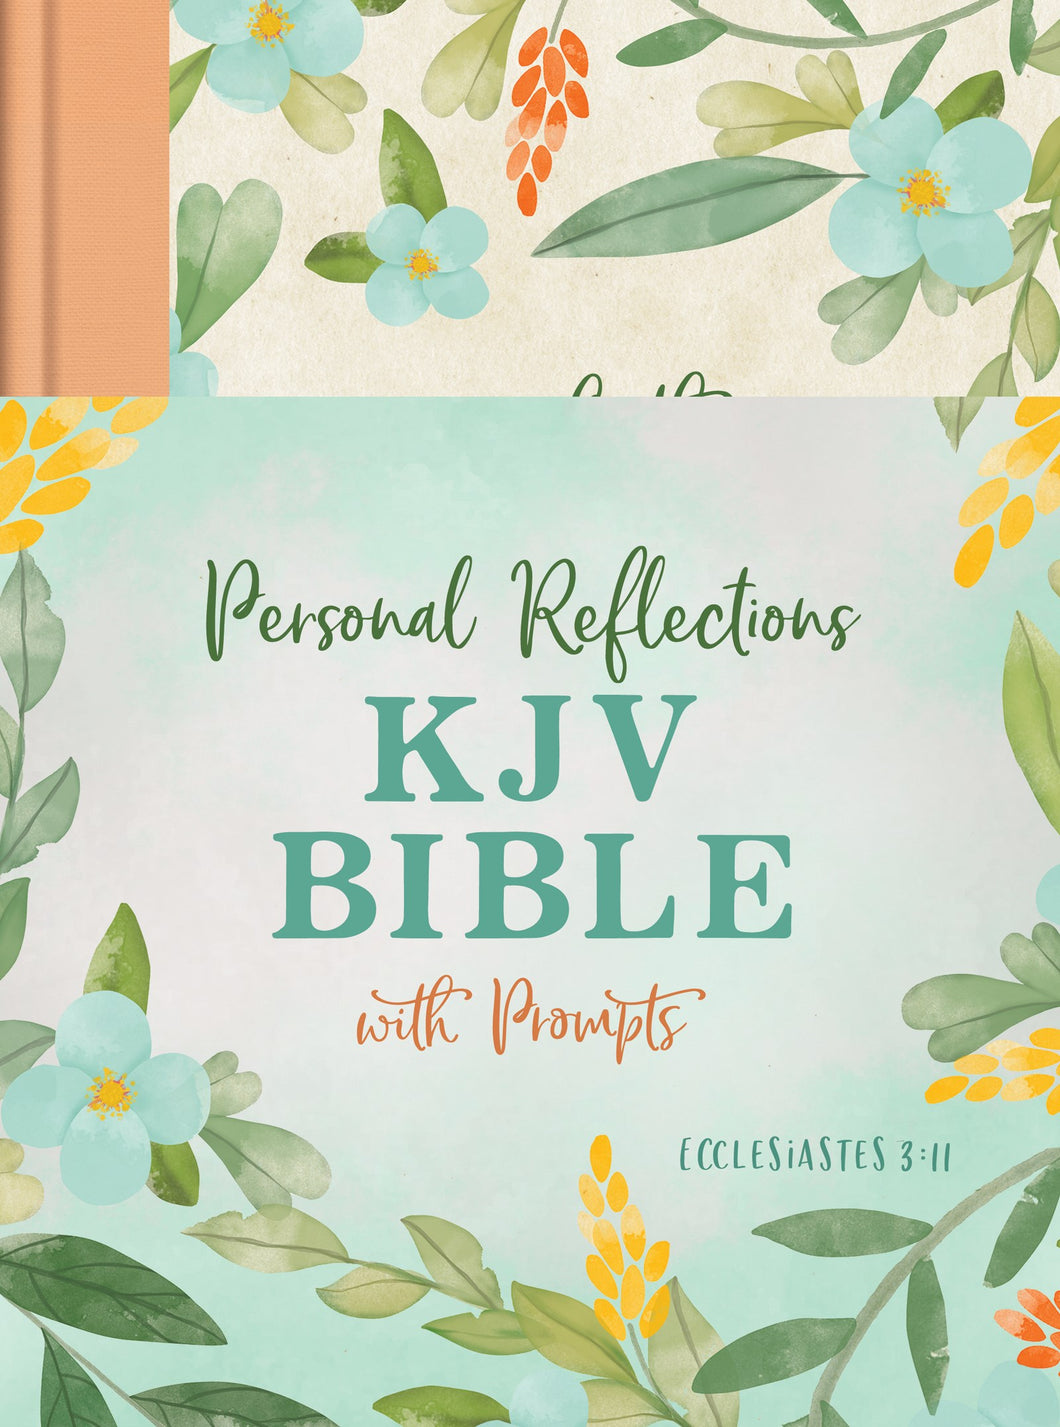 KJV Personal Reflections Bible with Prompts (Ecclesiastes 3:11)-Peach Floral Hardcover